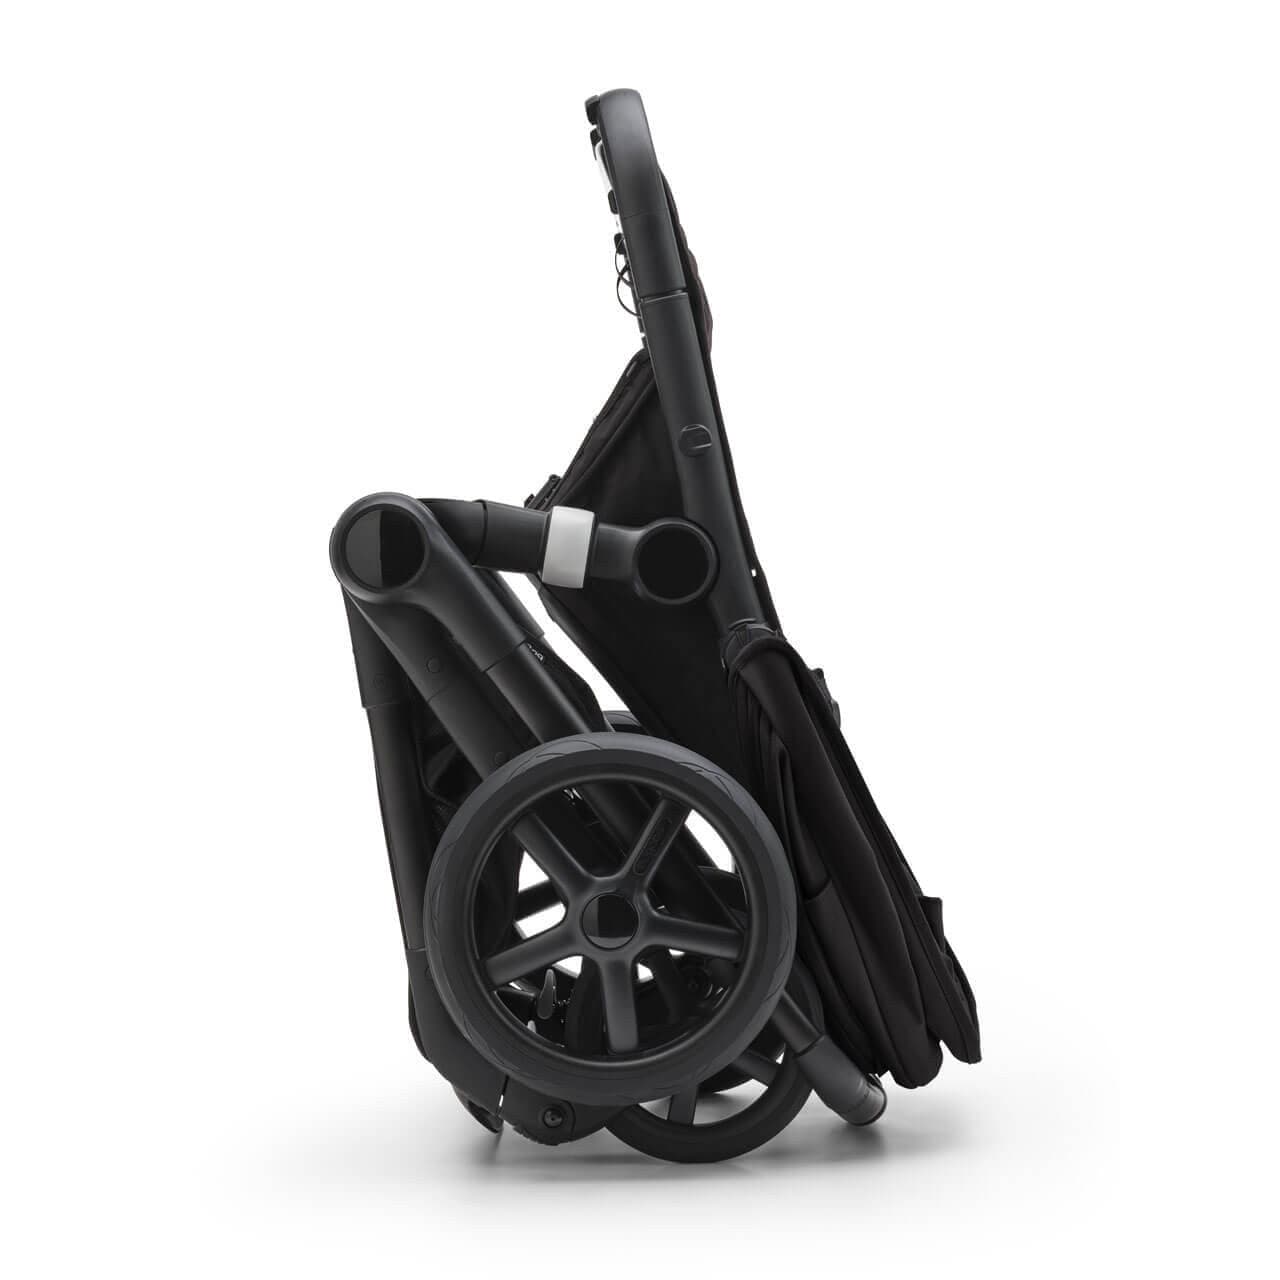 Bugaboo Fox 5 Complete Pushchair Graphite/Grey Melange - Choose Your Canopy -  | For Your Little One